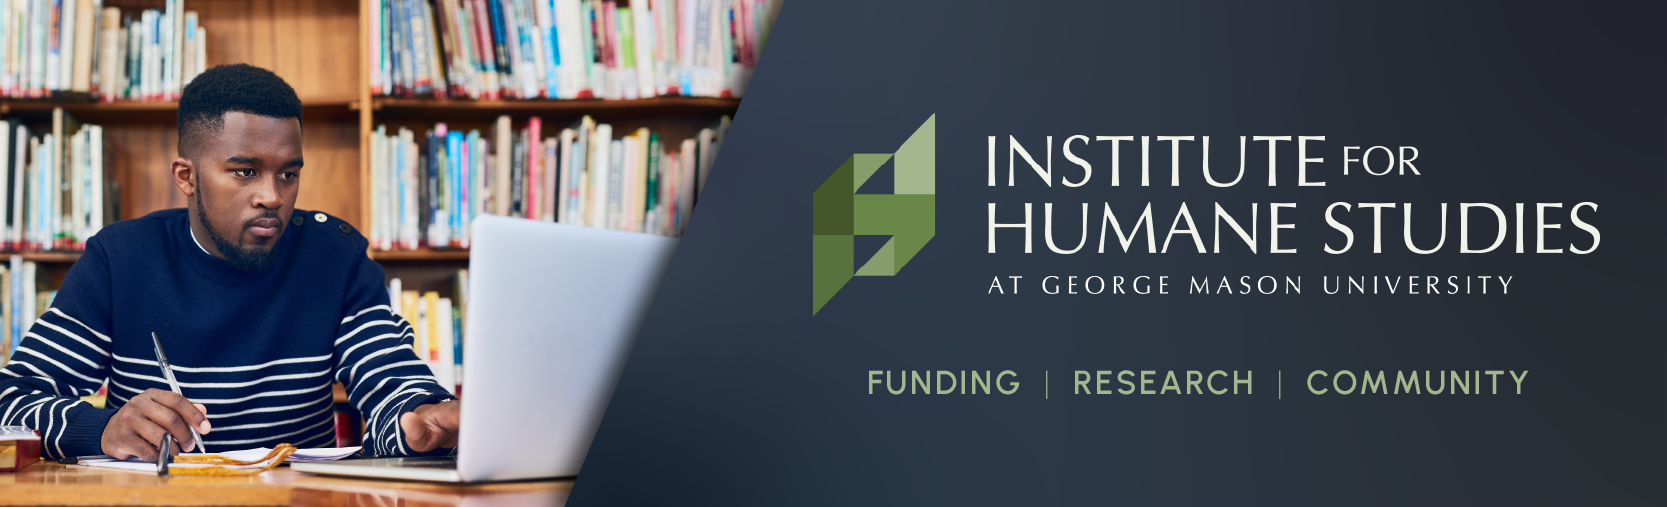 Institute for Humane Studies at George Mason University. Funding, research and community!